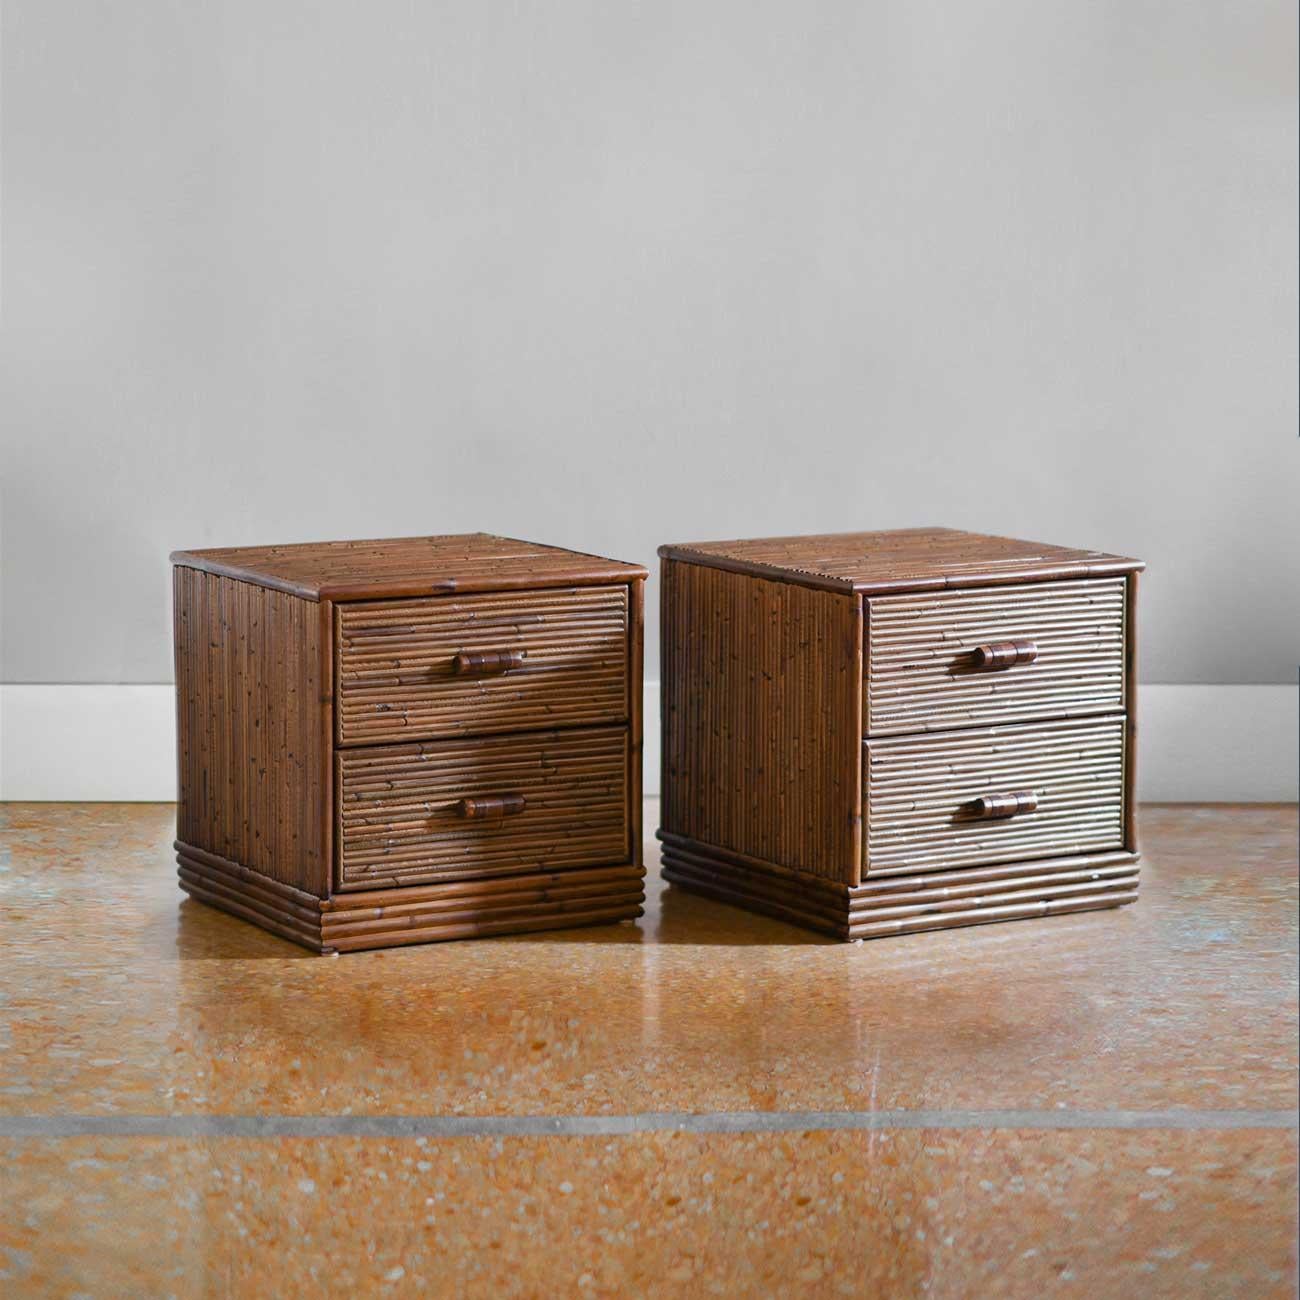 Pair of Bamboo Bedside Tables with Leather Bindings 'Set of 2' 1